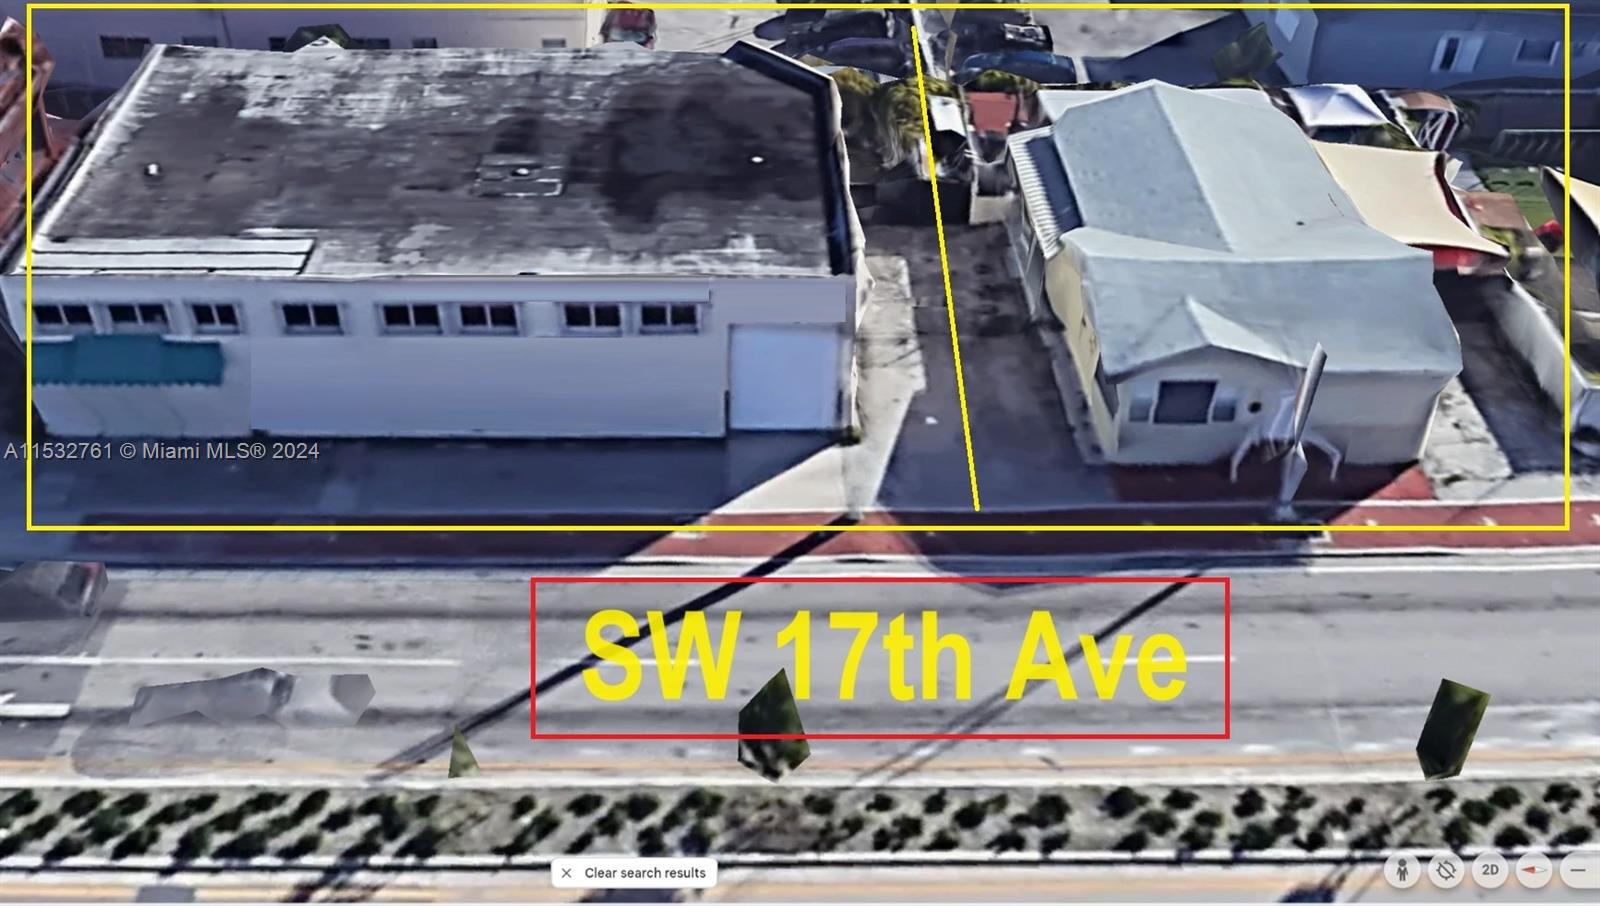 109 SW 17th Ave  For Sale A11532761, FL